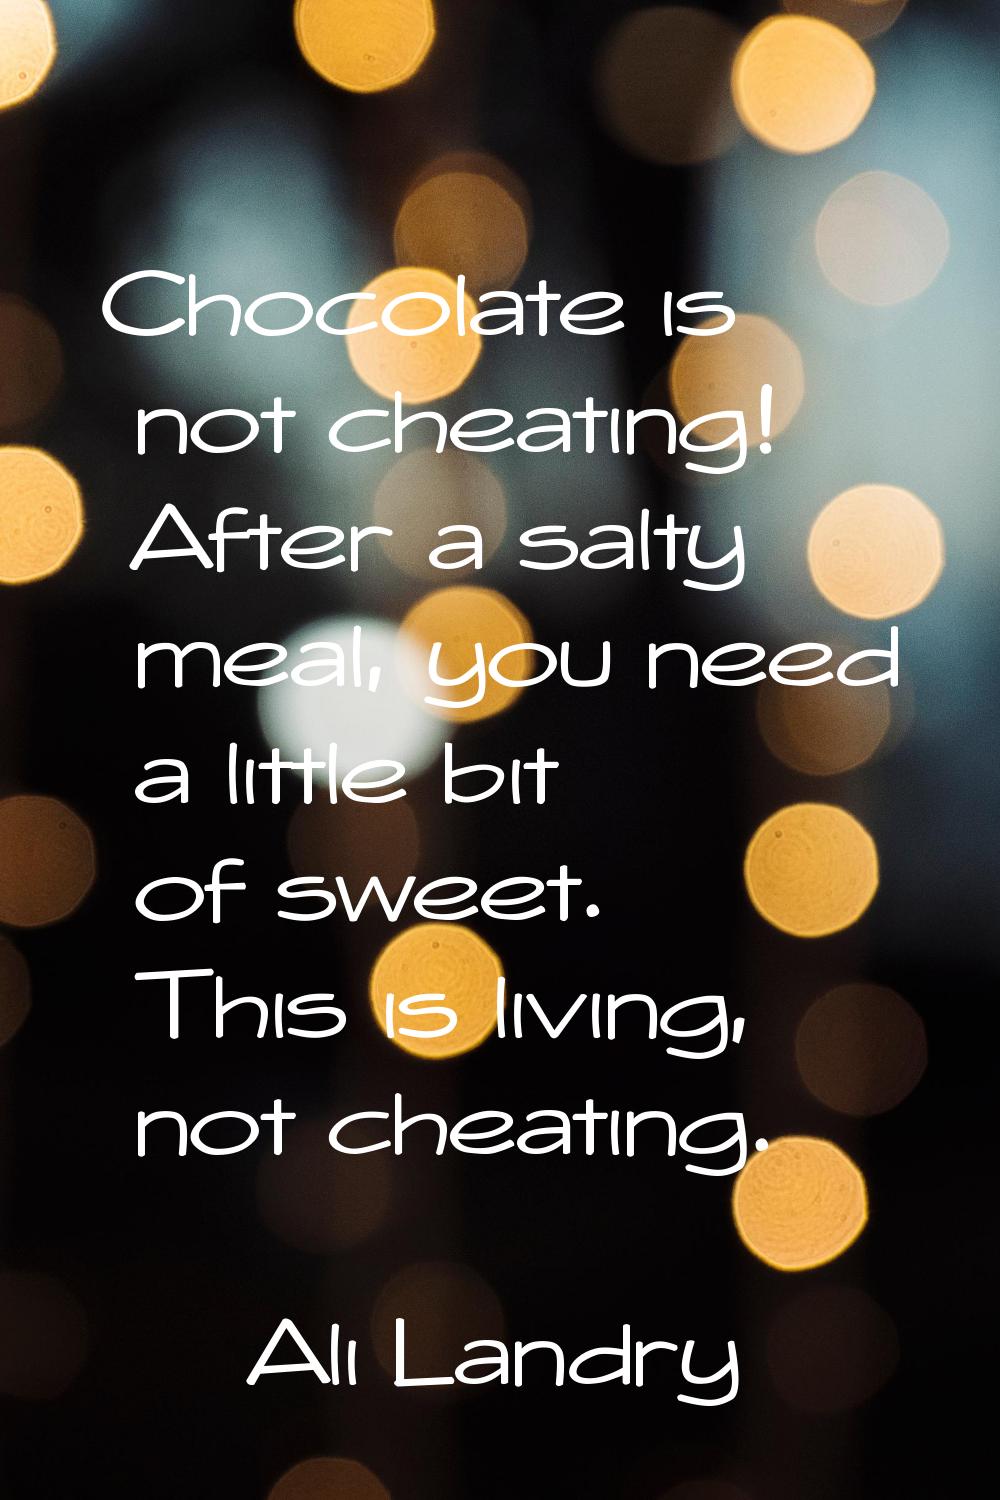 Chocolate is not cheating! After a salty meal, you need a little bit of sweet. This is living, not 